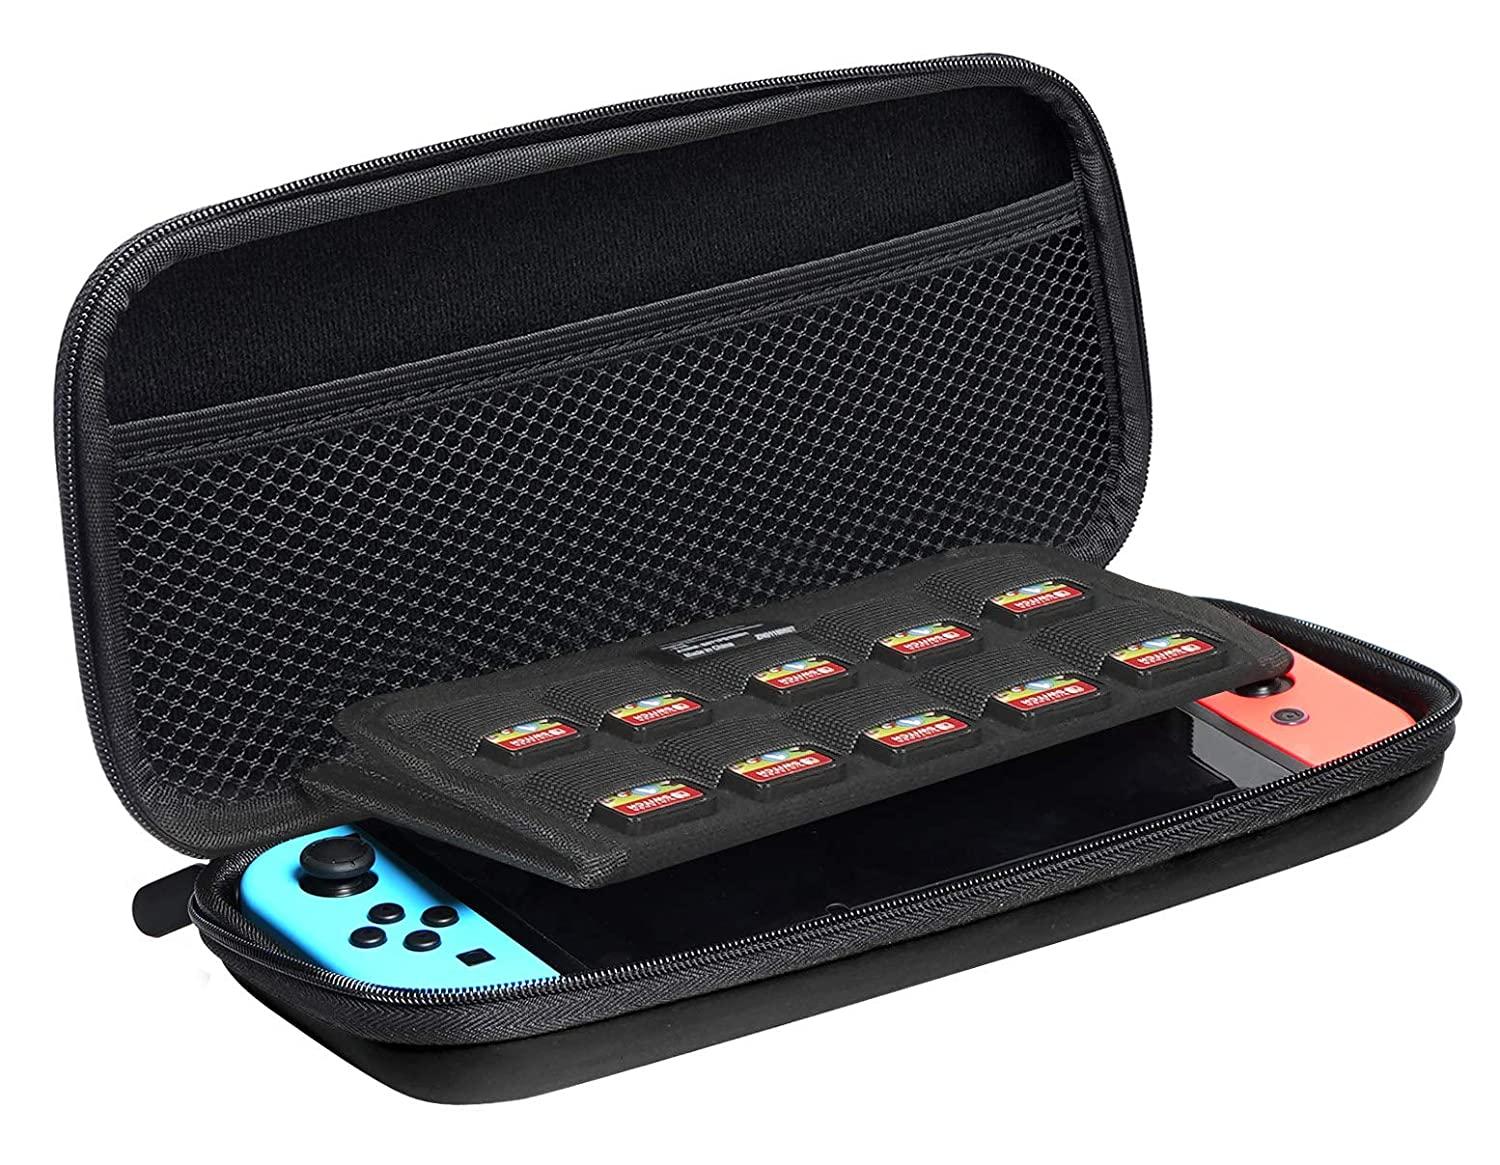 Amazon Basics Carrying Case for Nintendo Switch for $4.32